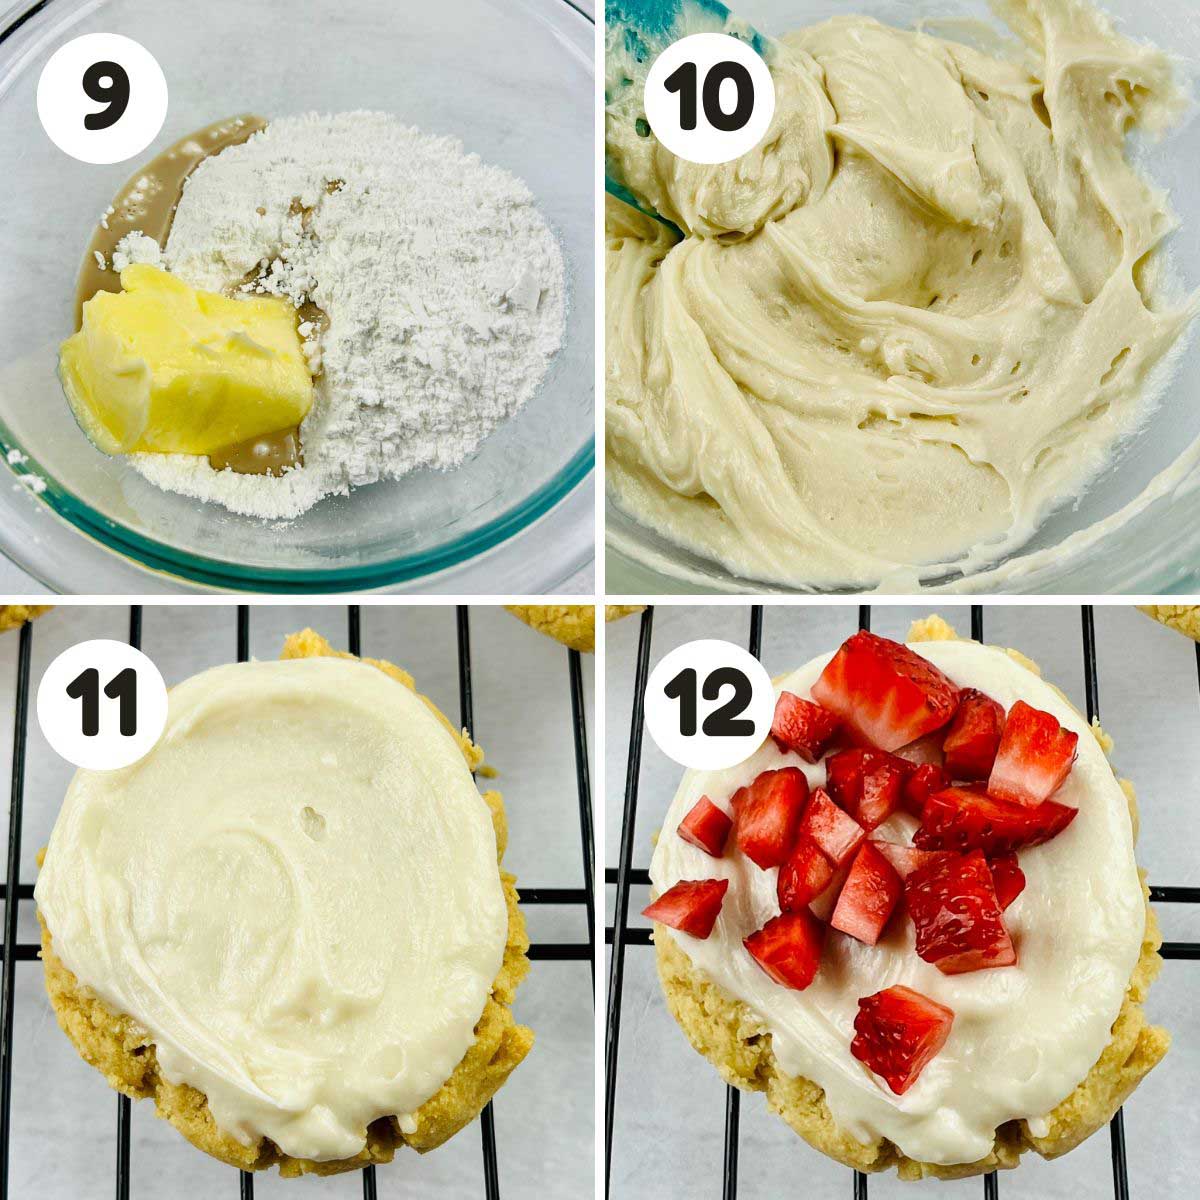 Steps to make the frosting.